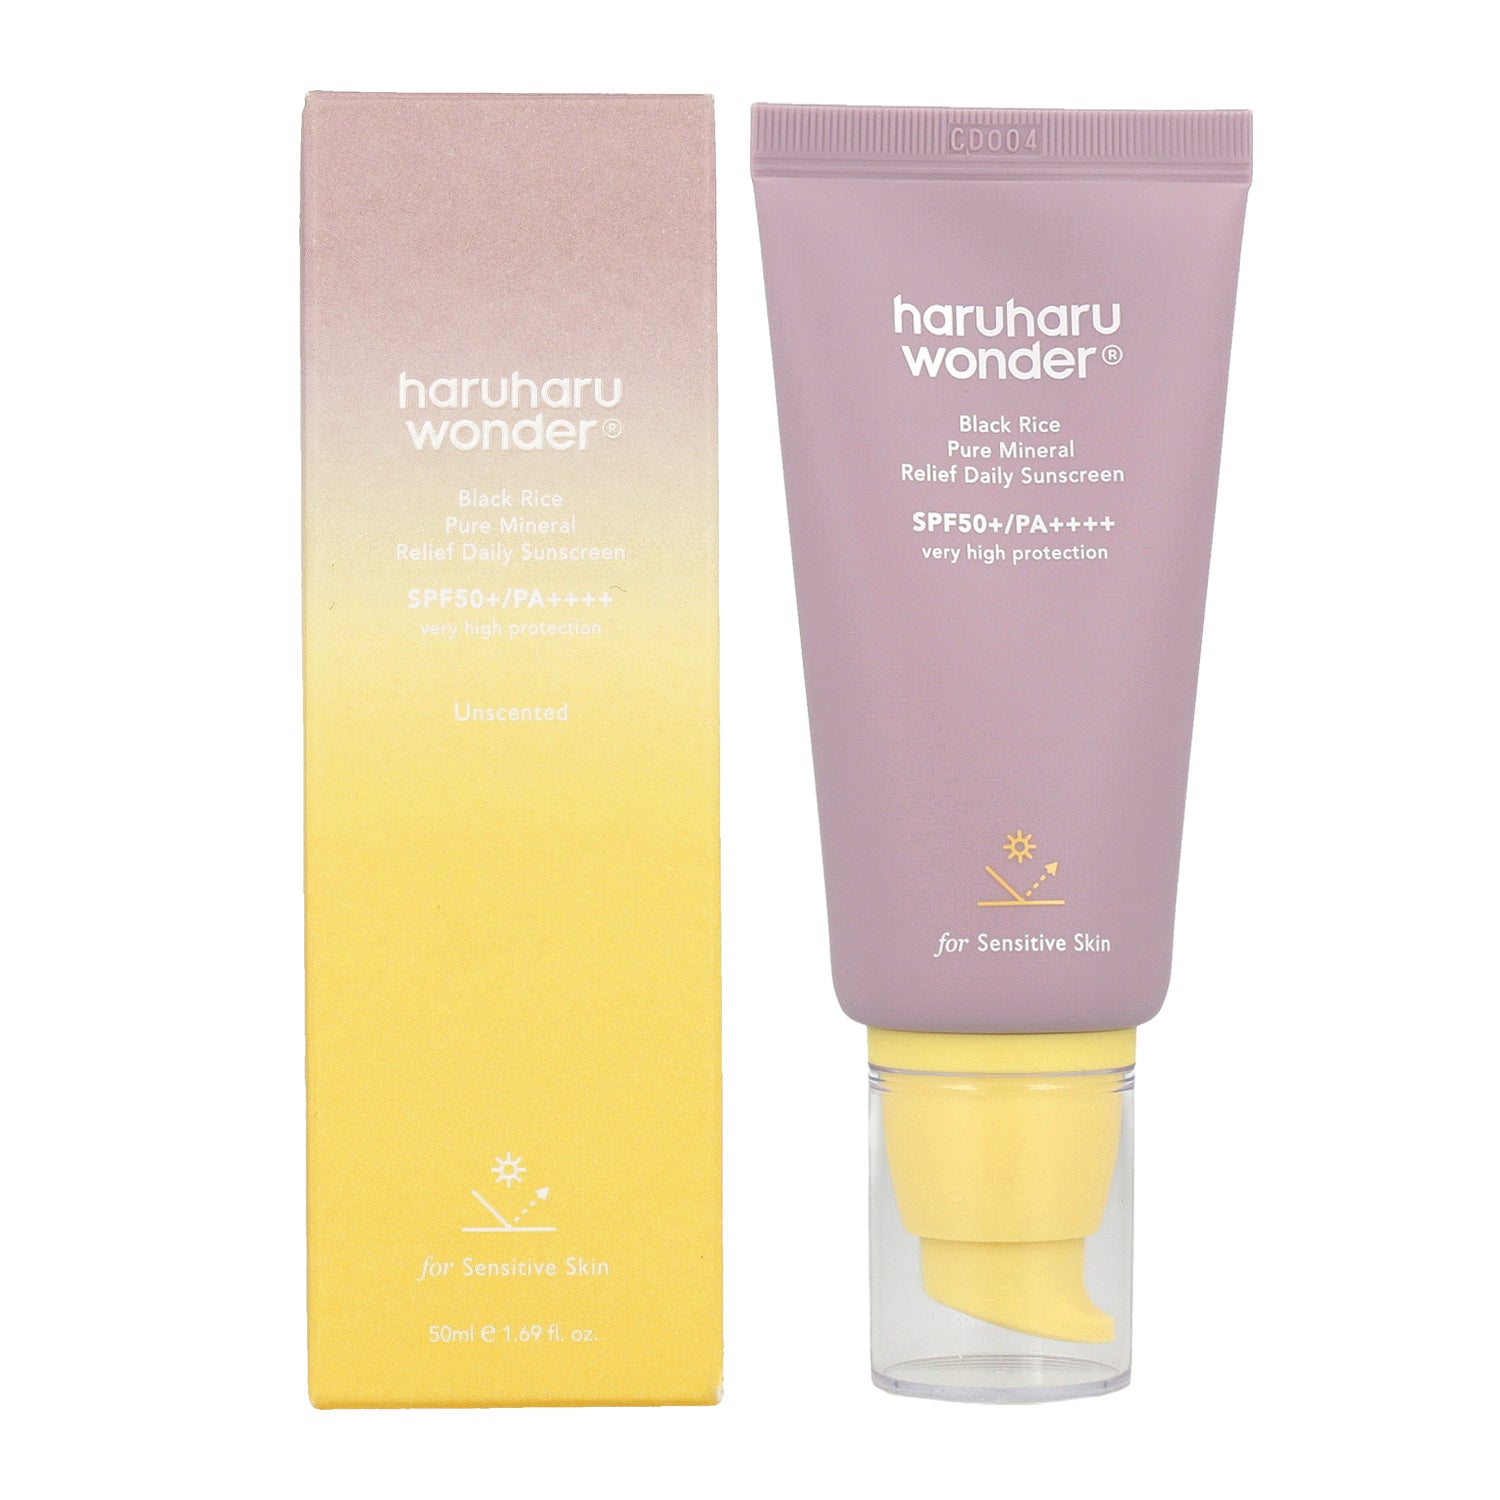 haruharu WONDER Black Rice Pure Mineral Relief Daily Sunscreen SPF50+ PA++++ 50ml - DODOSKIN